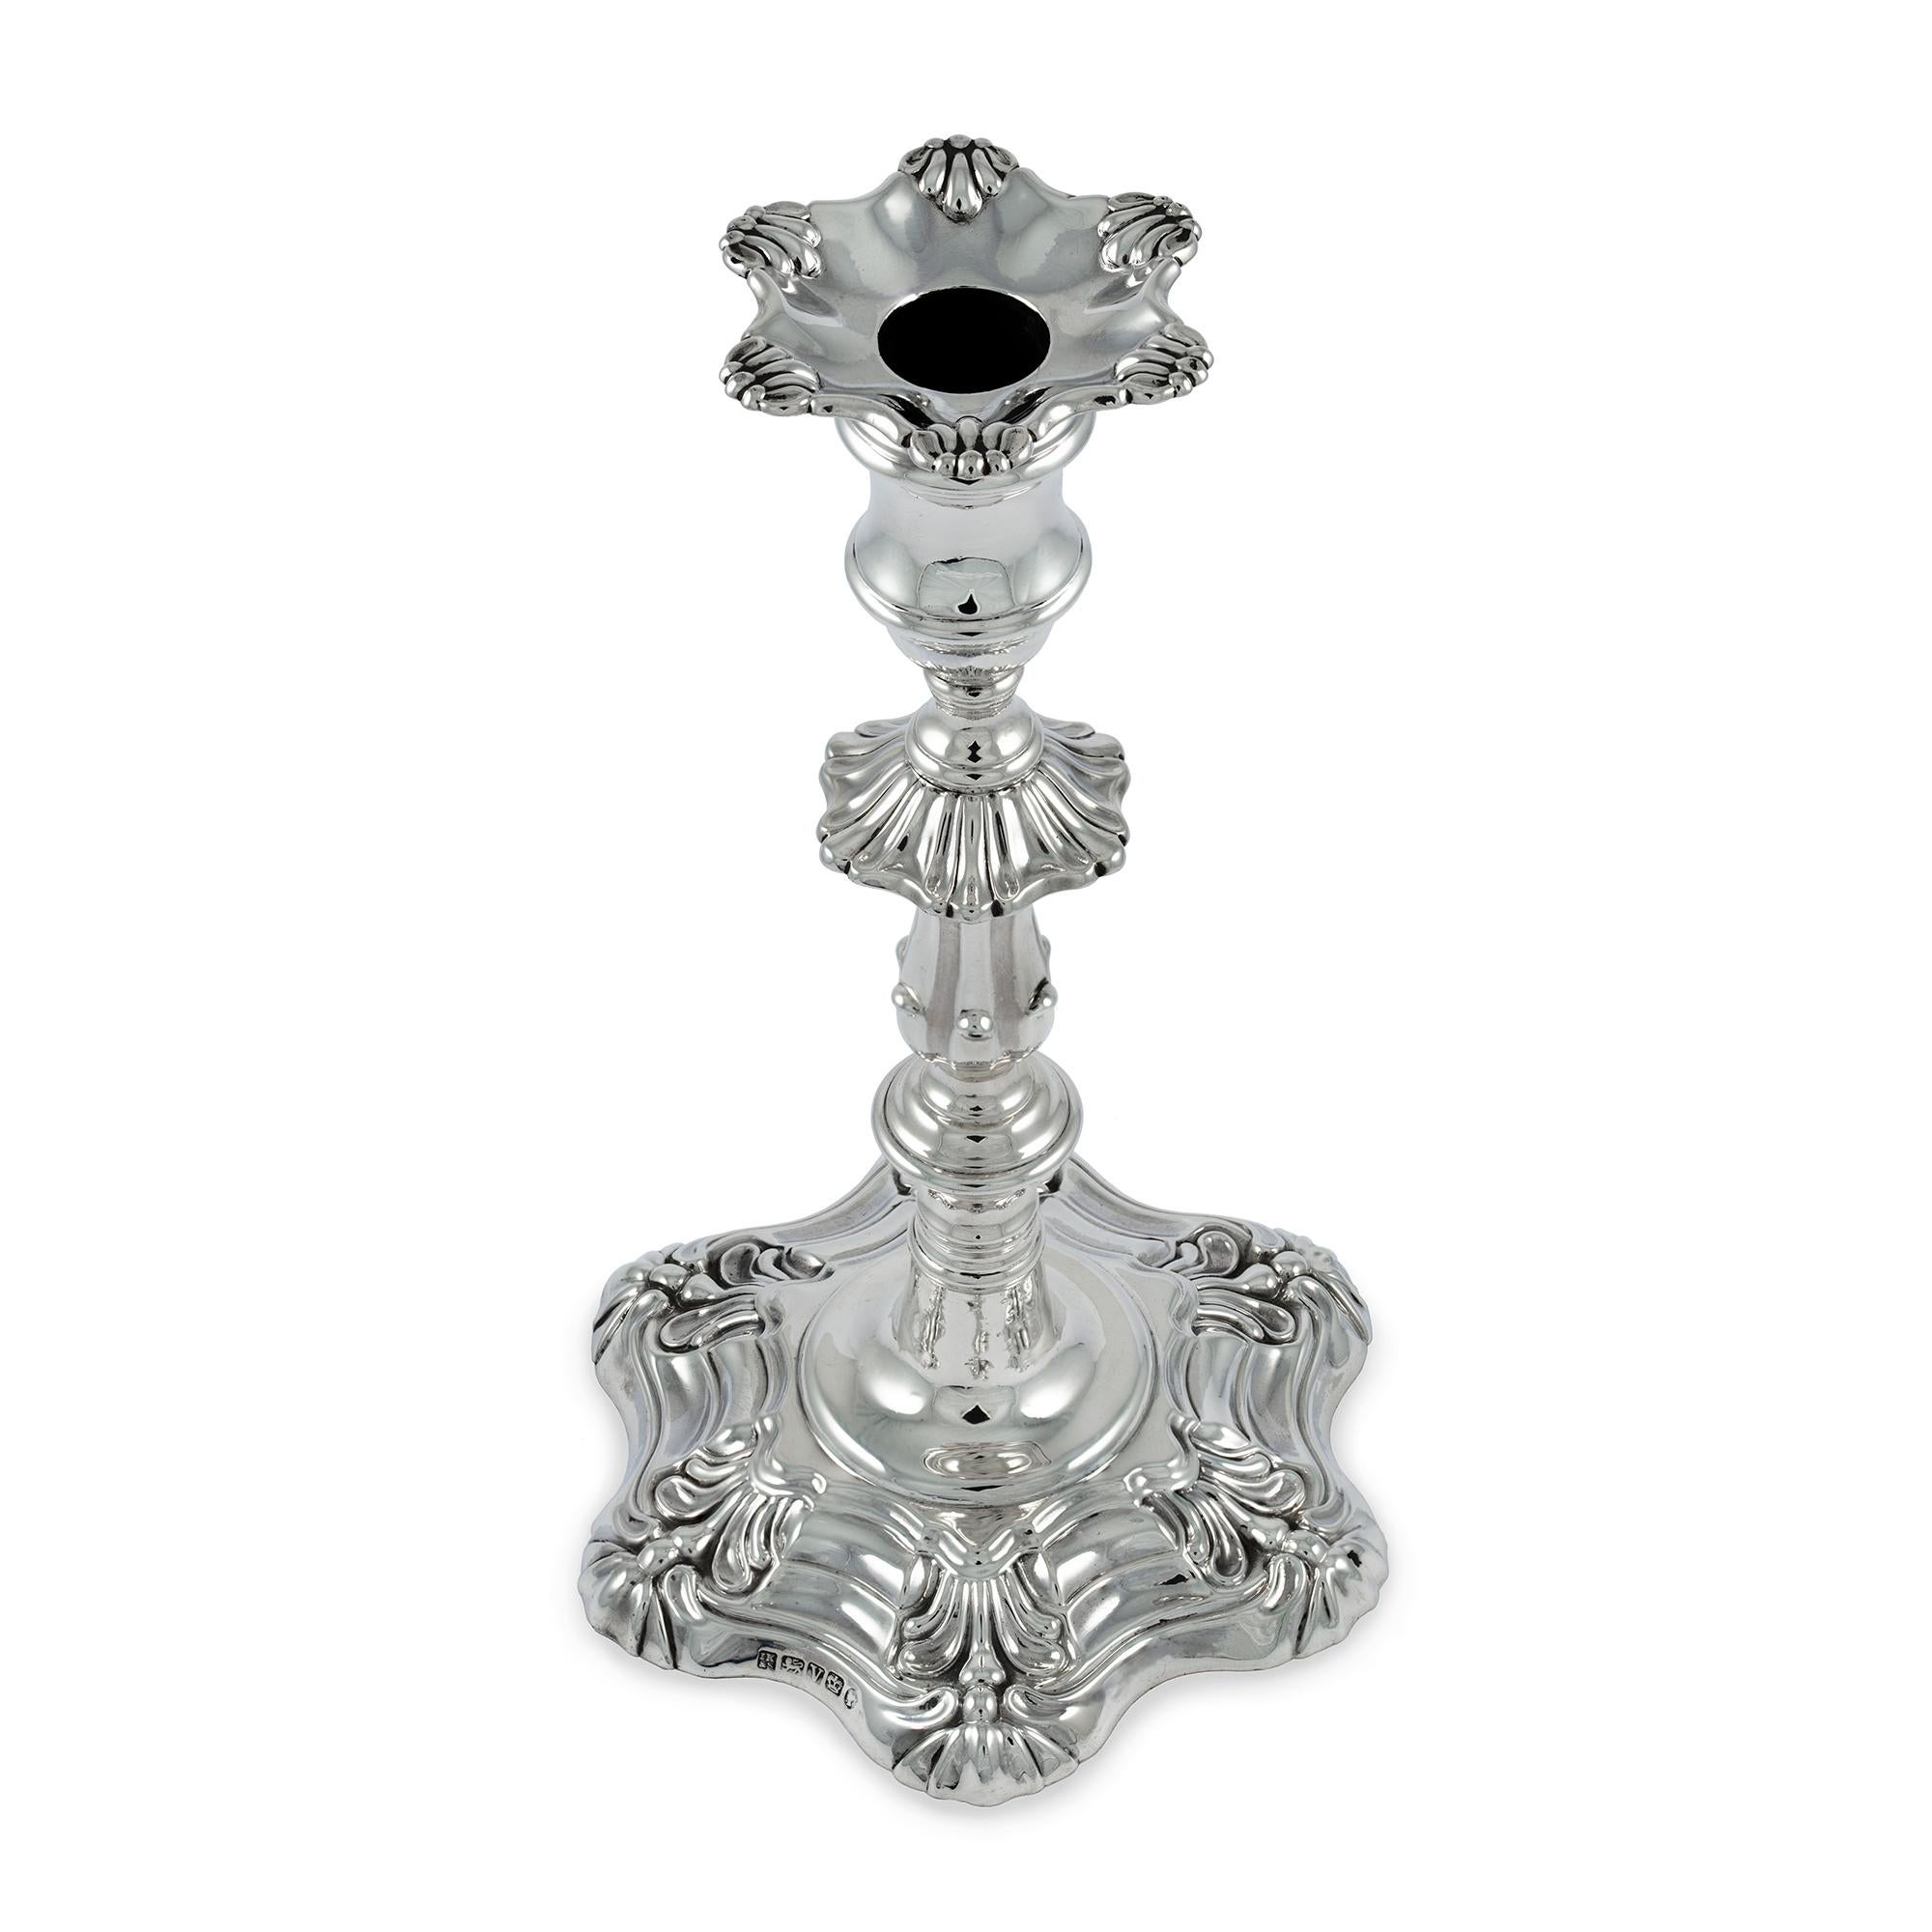 A pair of Victorian sterling silver loaded candlesticks, having decorative baluster stems, with a six-scroll pattern base and detachable sconces, maker John Knowles & Son, Sheffield, 1888, height 9